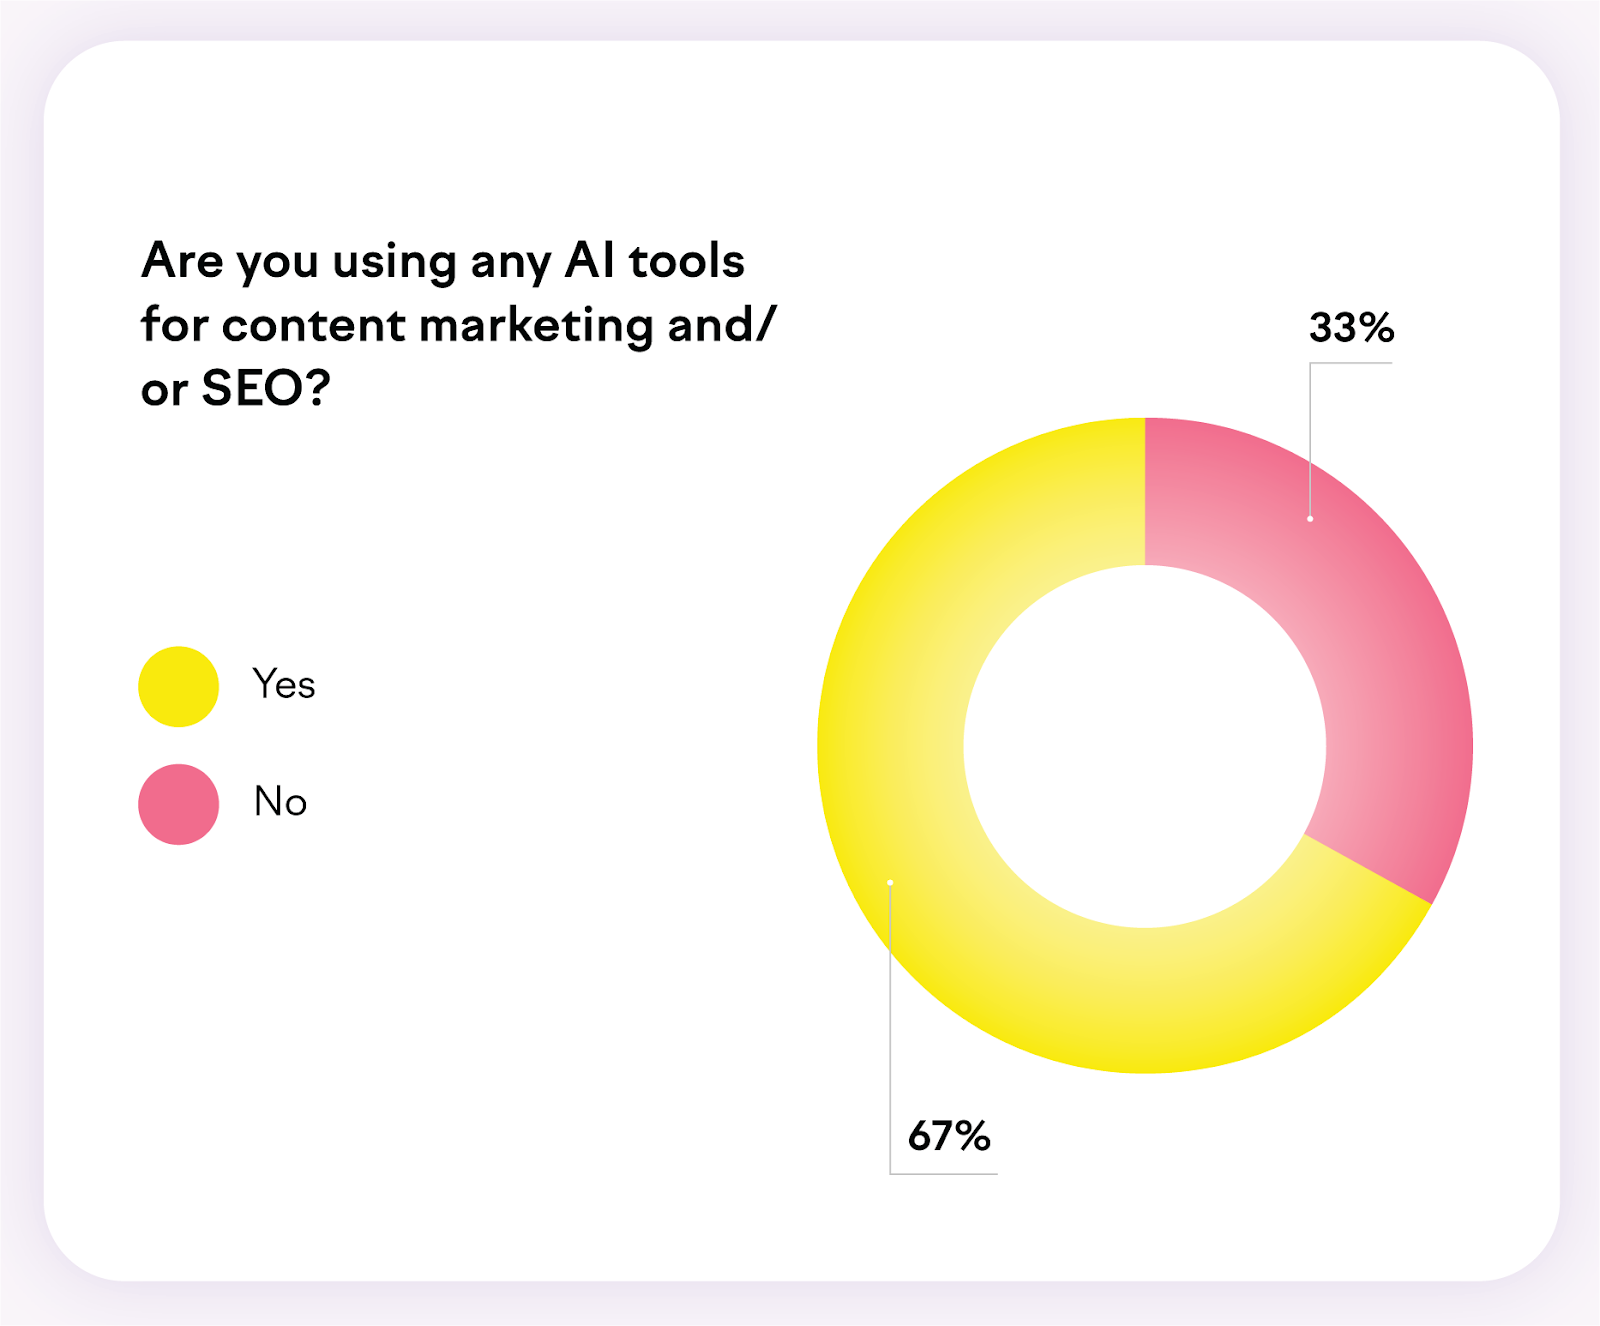 Semrush sruvey results graph showing 67% use AI for content marketing and SEO.